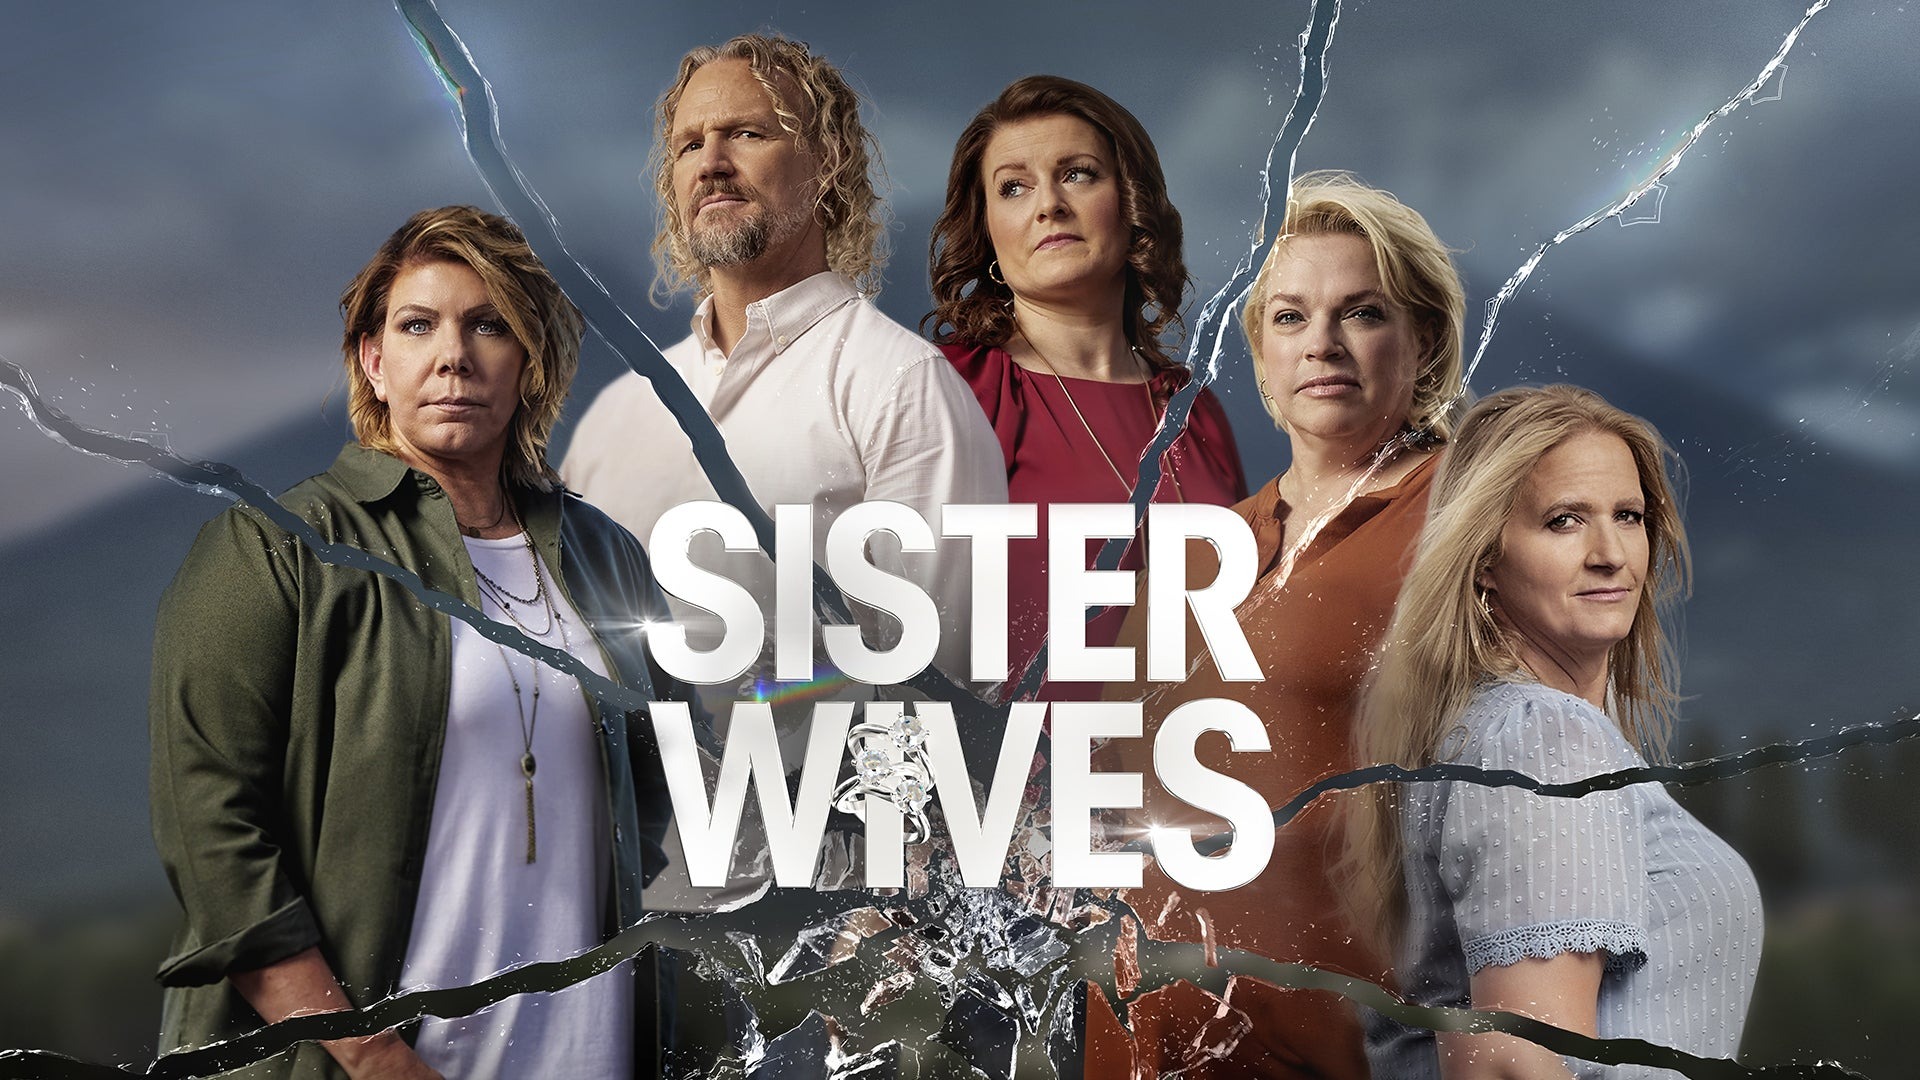 Sister Wives: Season 18 of Reality Series Gets Premiere Date on TLC (Watch) – canceled + renewed TV shows